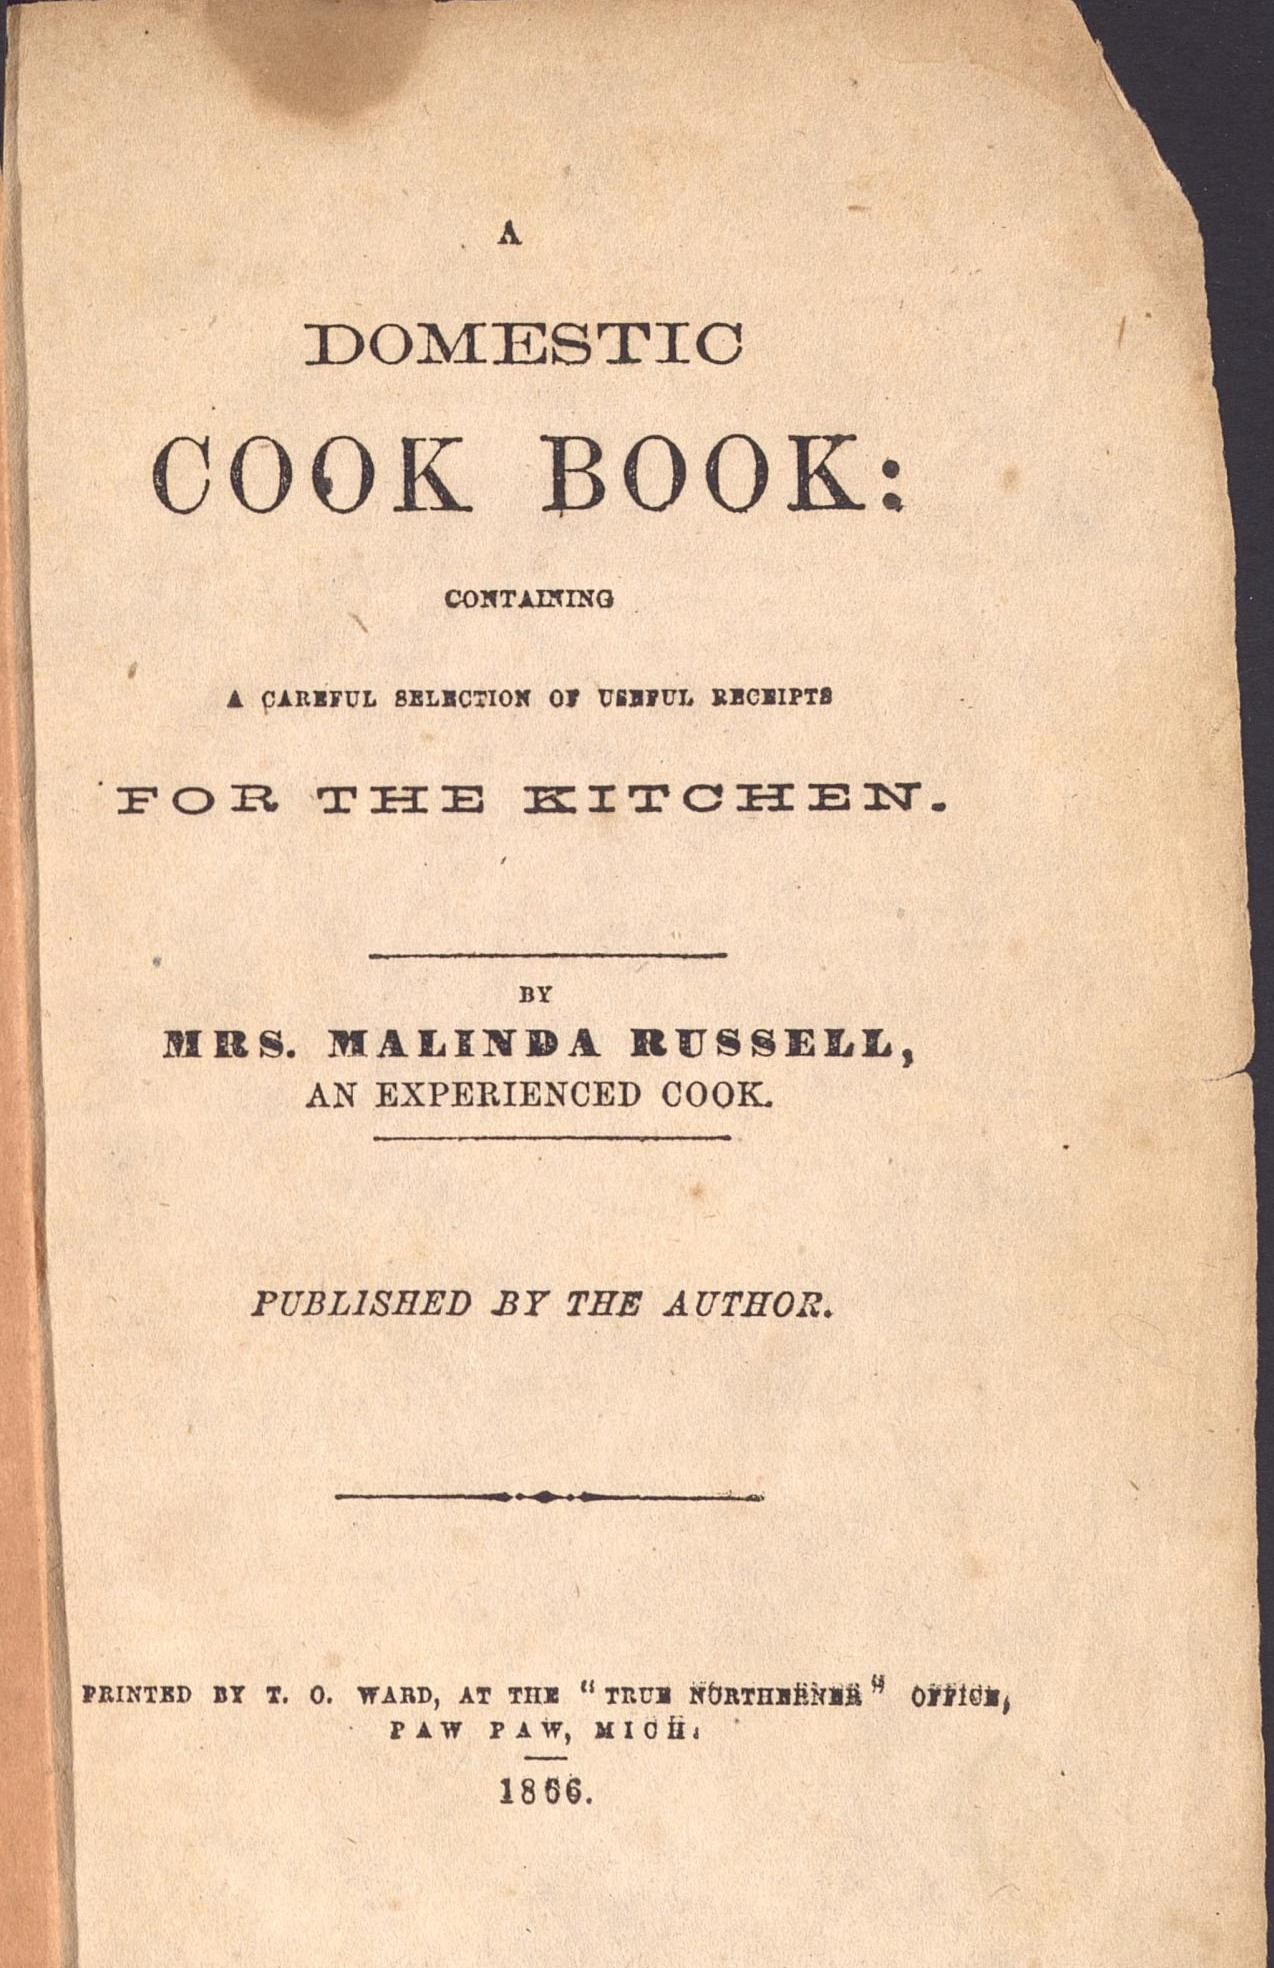 The front page of Malinda Russell's <em>Domestic Cook Book.</em>